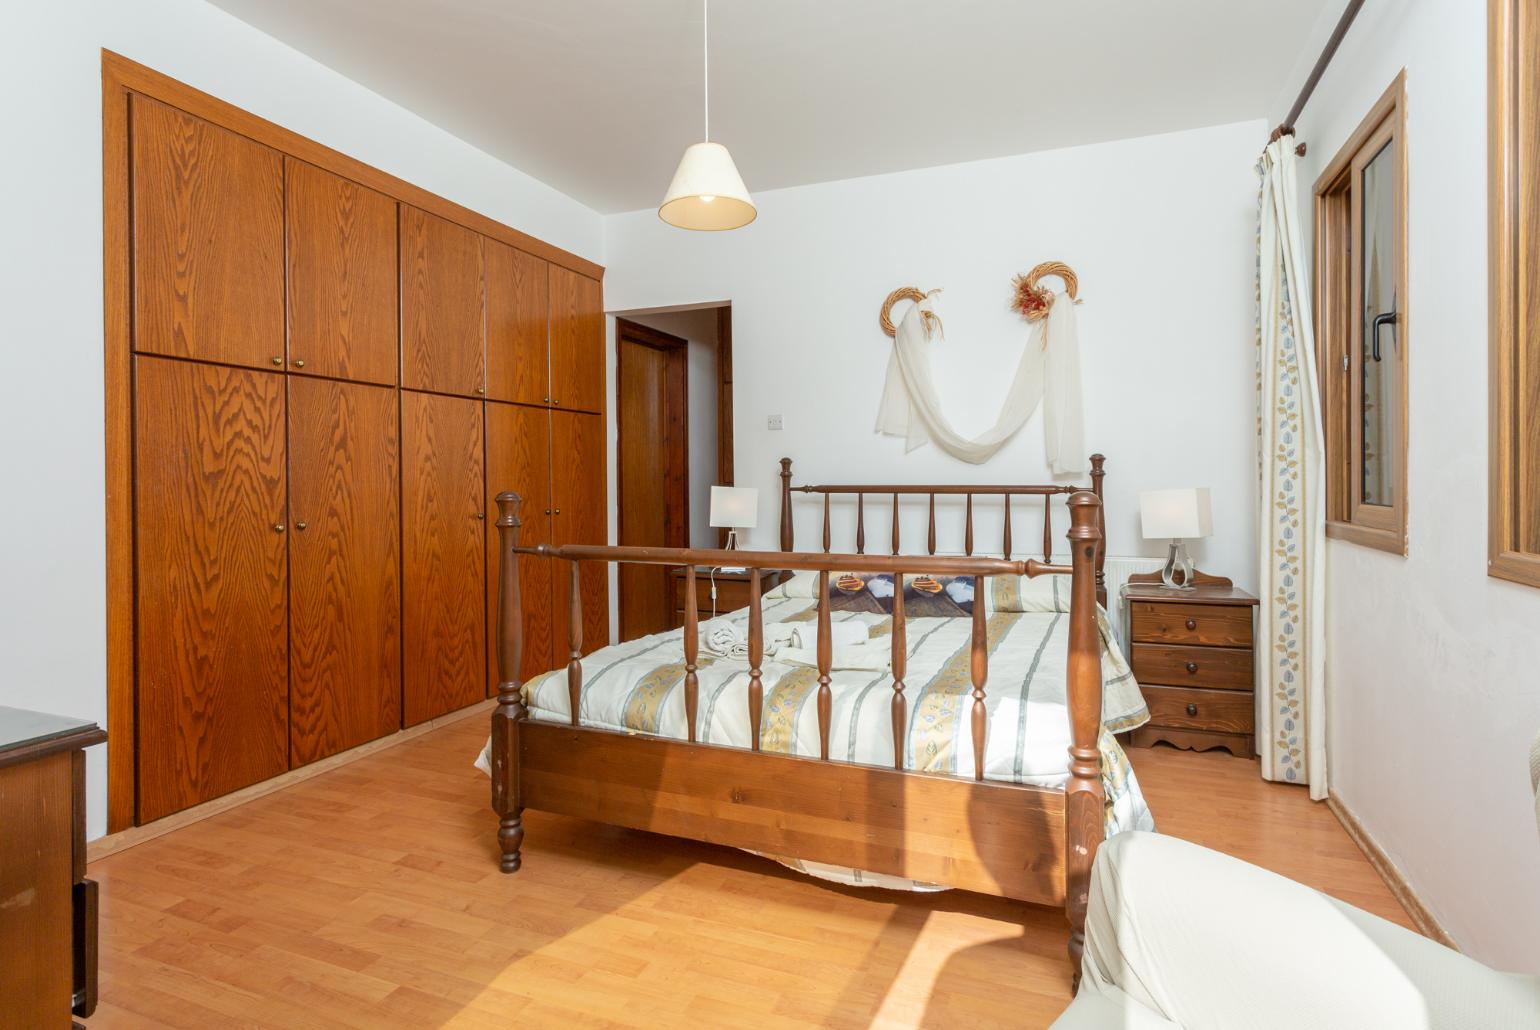 Double bedroom with en suite bathroom, A/C, and balcony access with sea views 